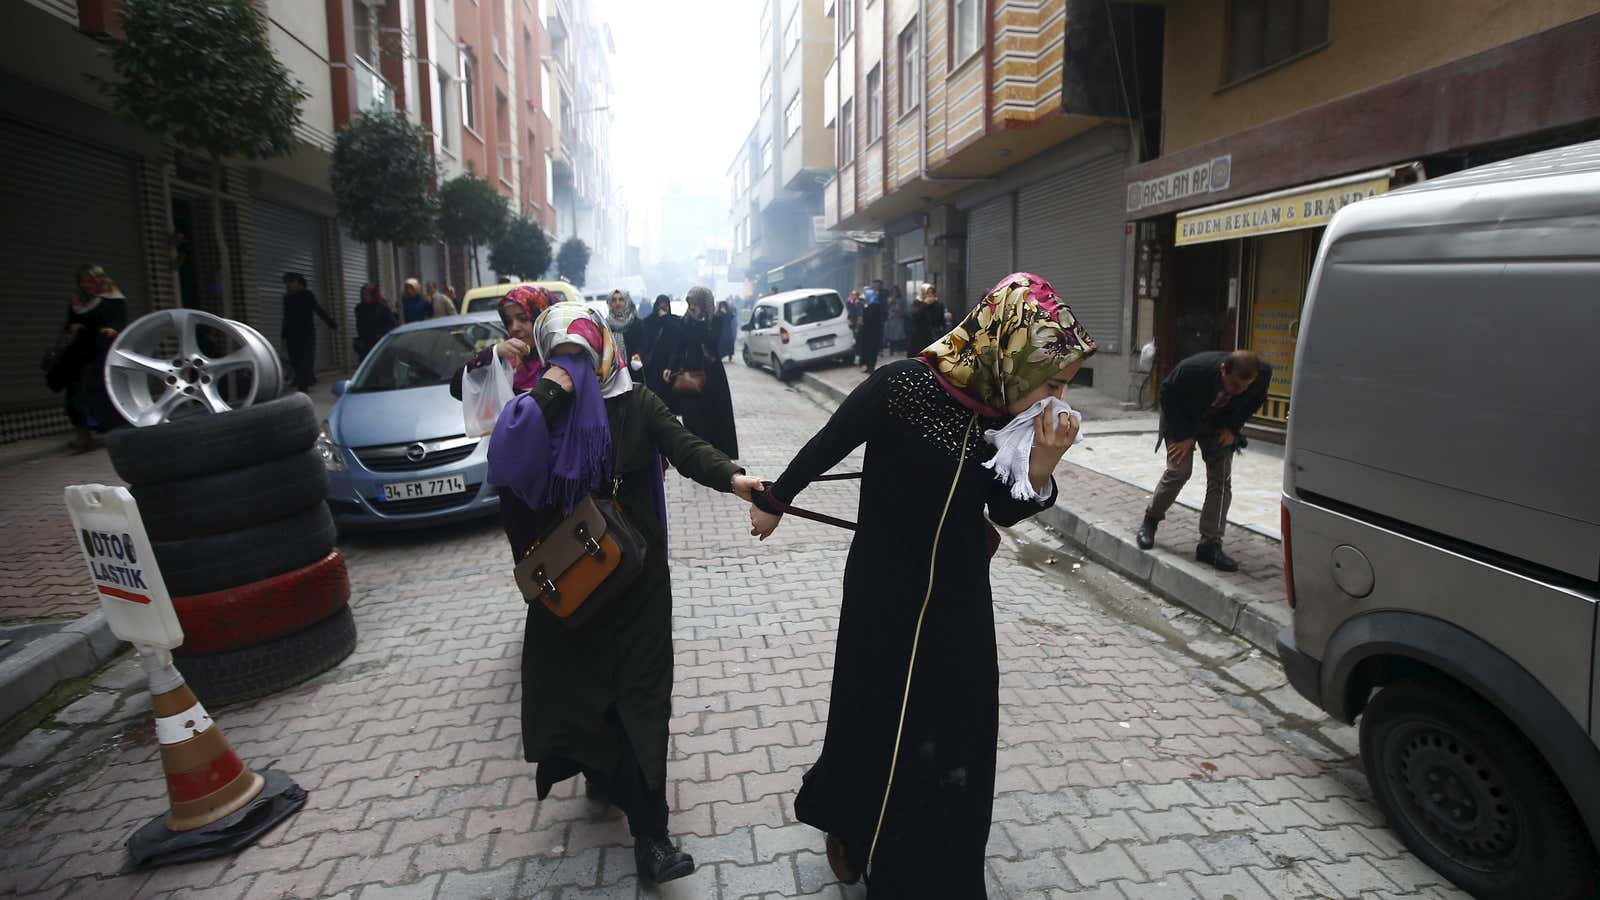 Tear gas was used to disperse protesters outside Zaman’s office.